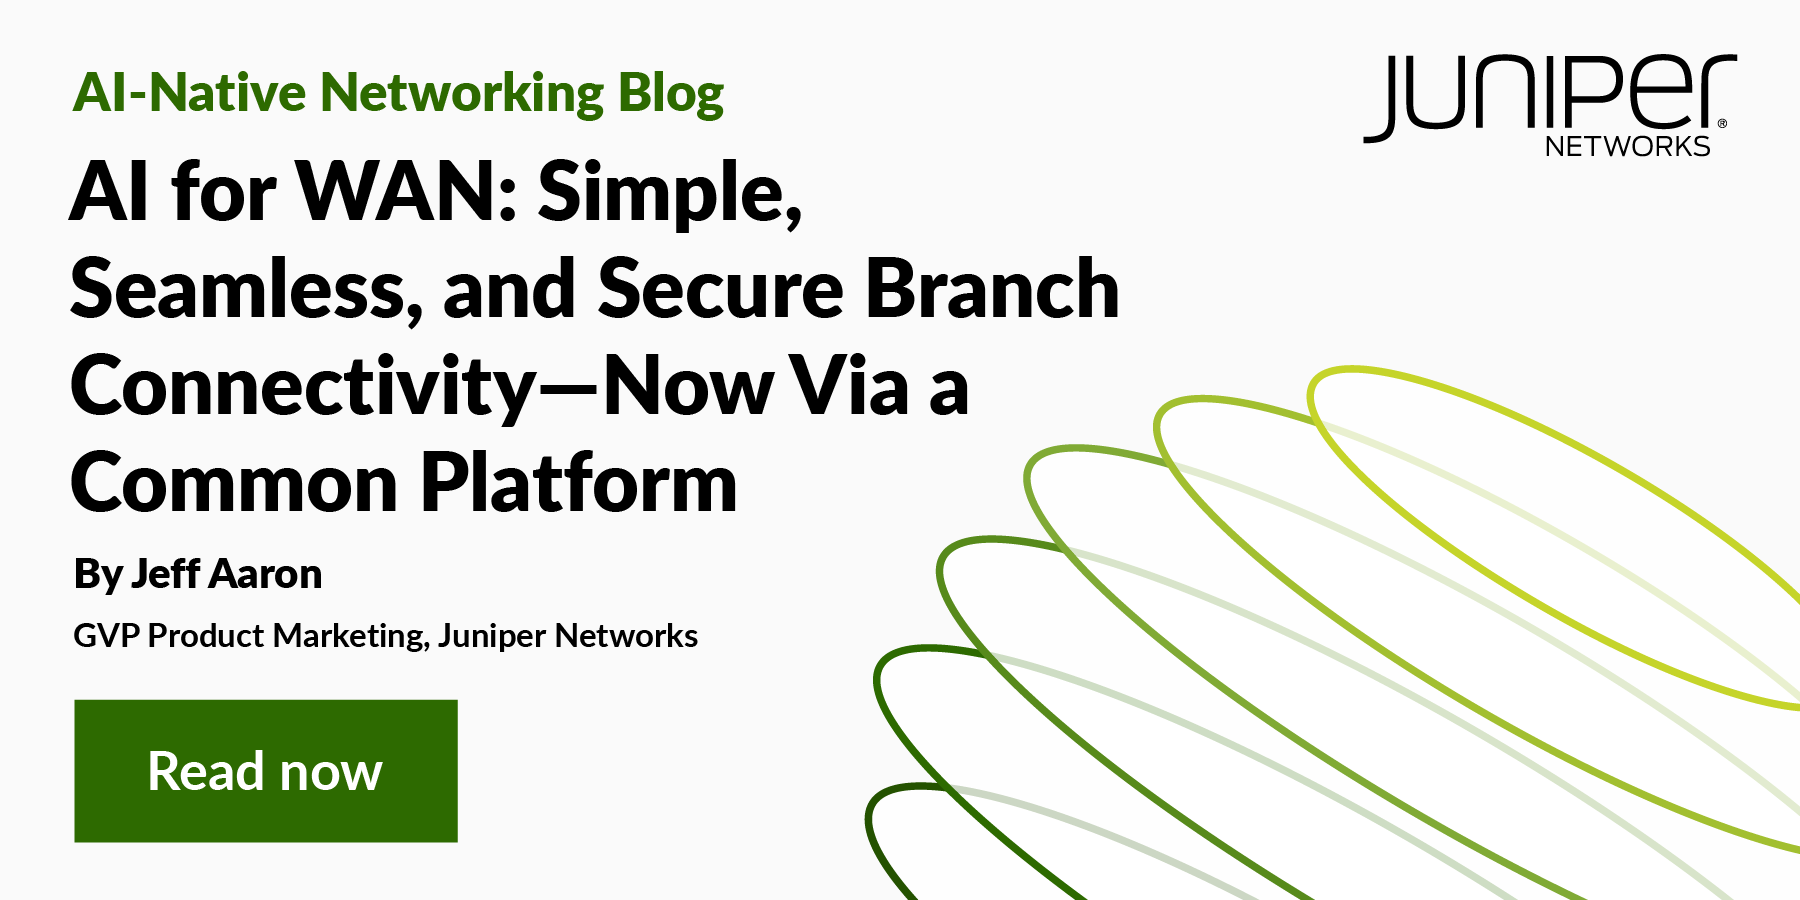 AI for WAN: Simple, Seamless, and Secure Branch Connectivity—Now Via a Common Platform